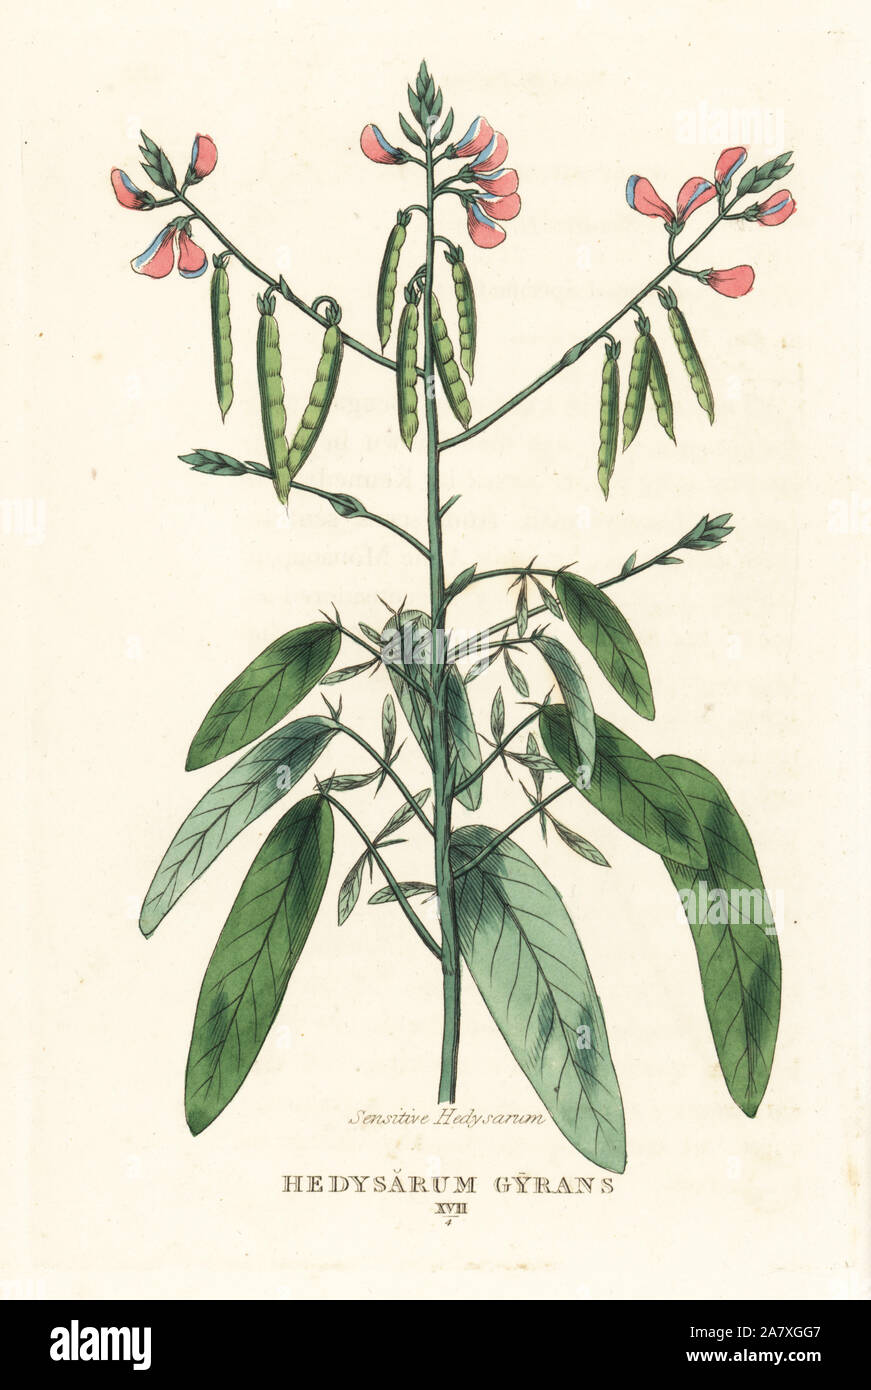 Telegraph plant, Codariocalyx motorius (Sensitive hedysarum, Hedysarum gyrans). Handcoloured copperplate engraving after an illustration by Richard Duppa from his The Classes and Orders of the Linnaean System of Botany, Longman, Hurst, London, 1816. Stock Photo